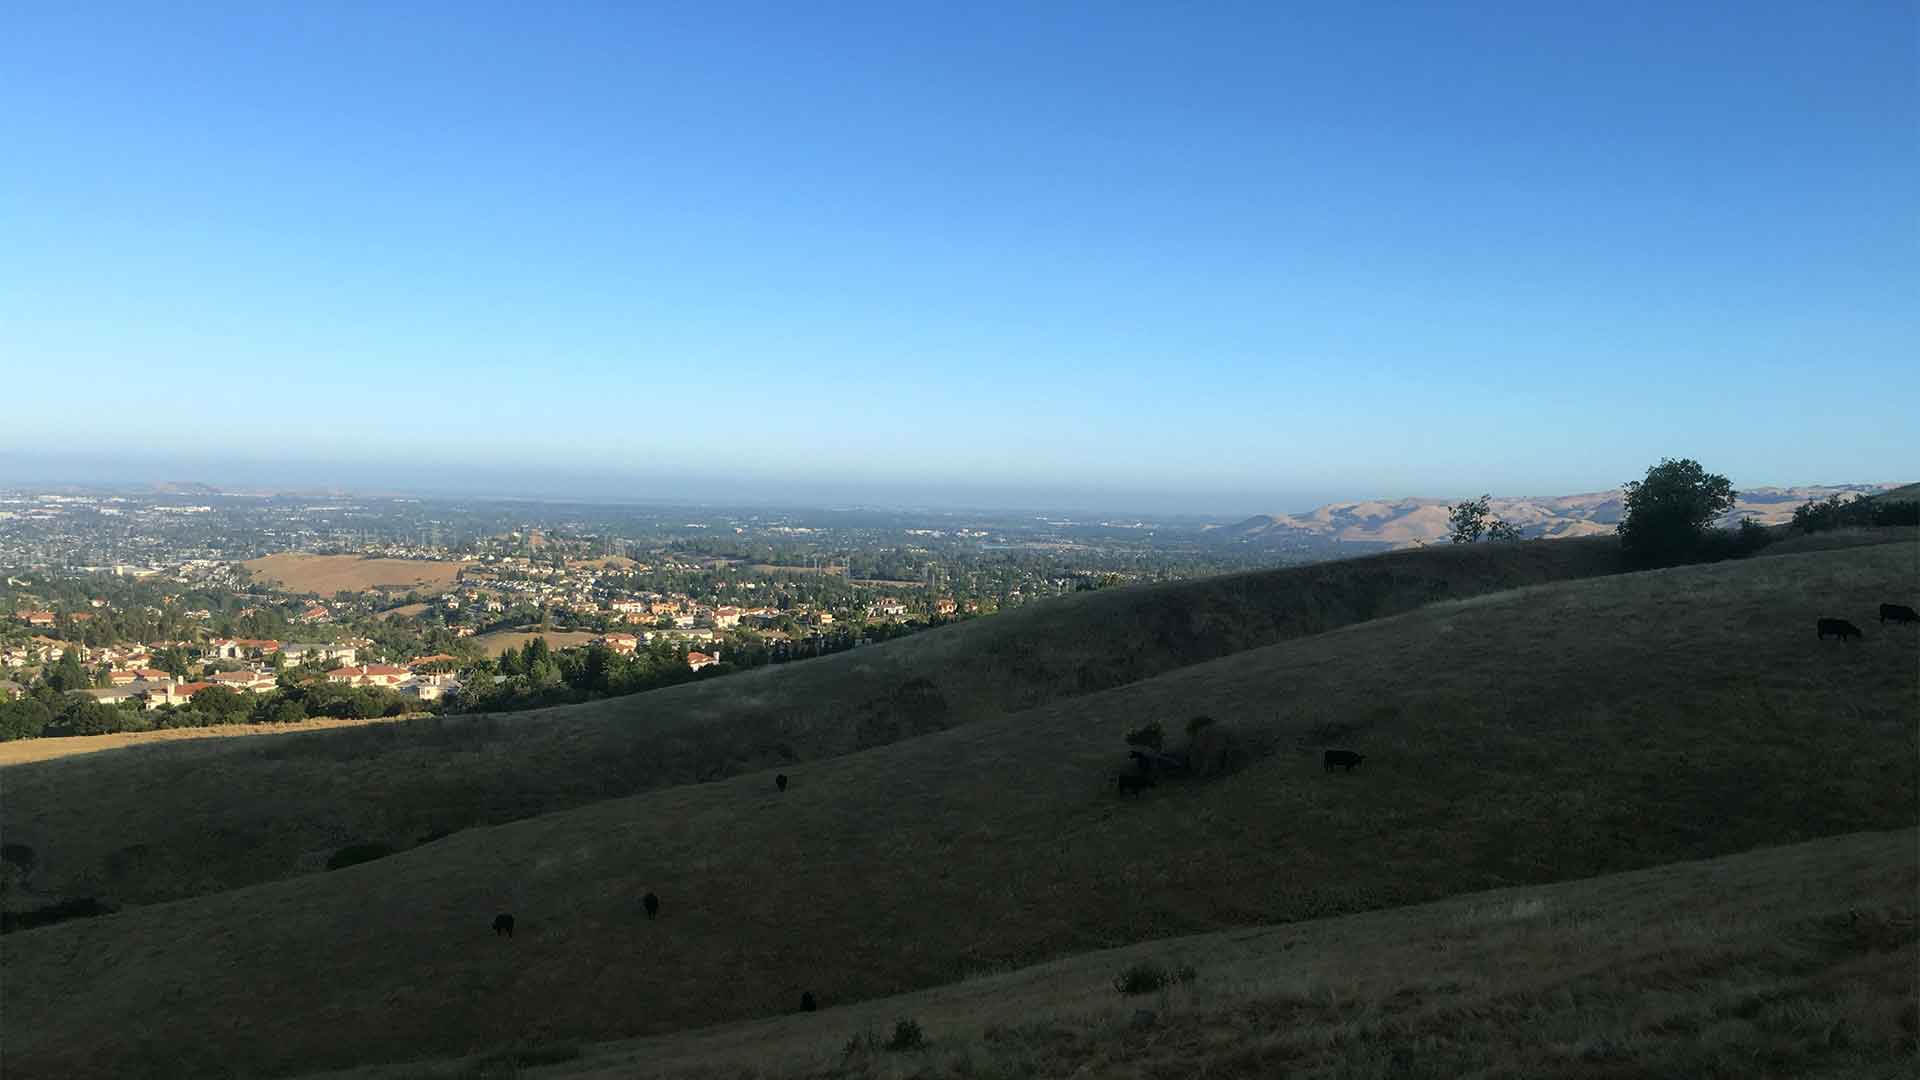 Photos from To Mission Peak 8